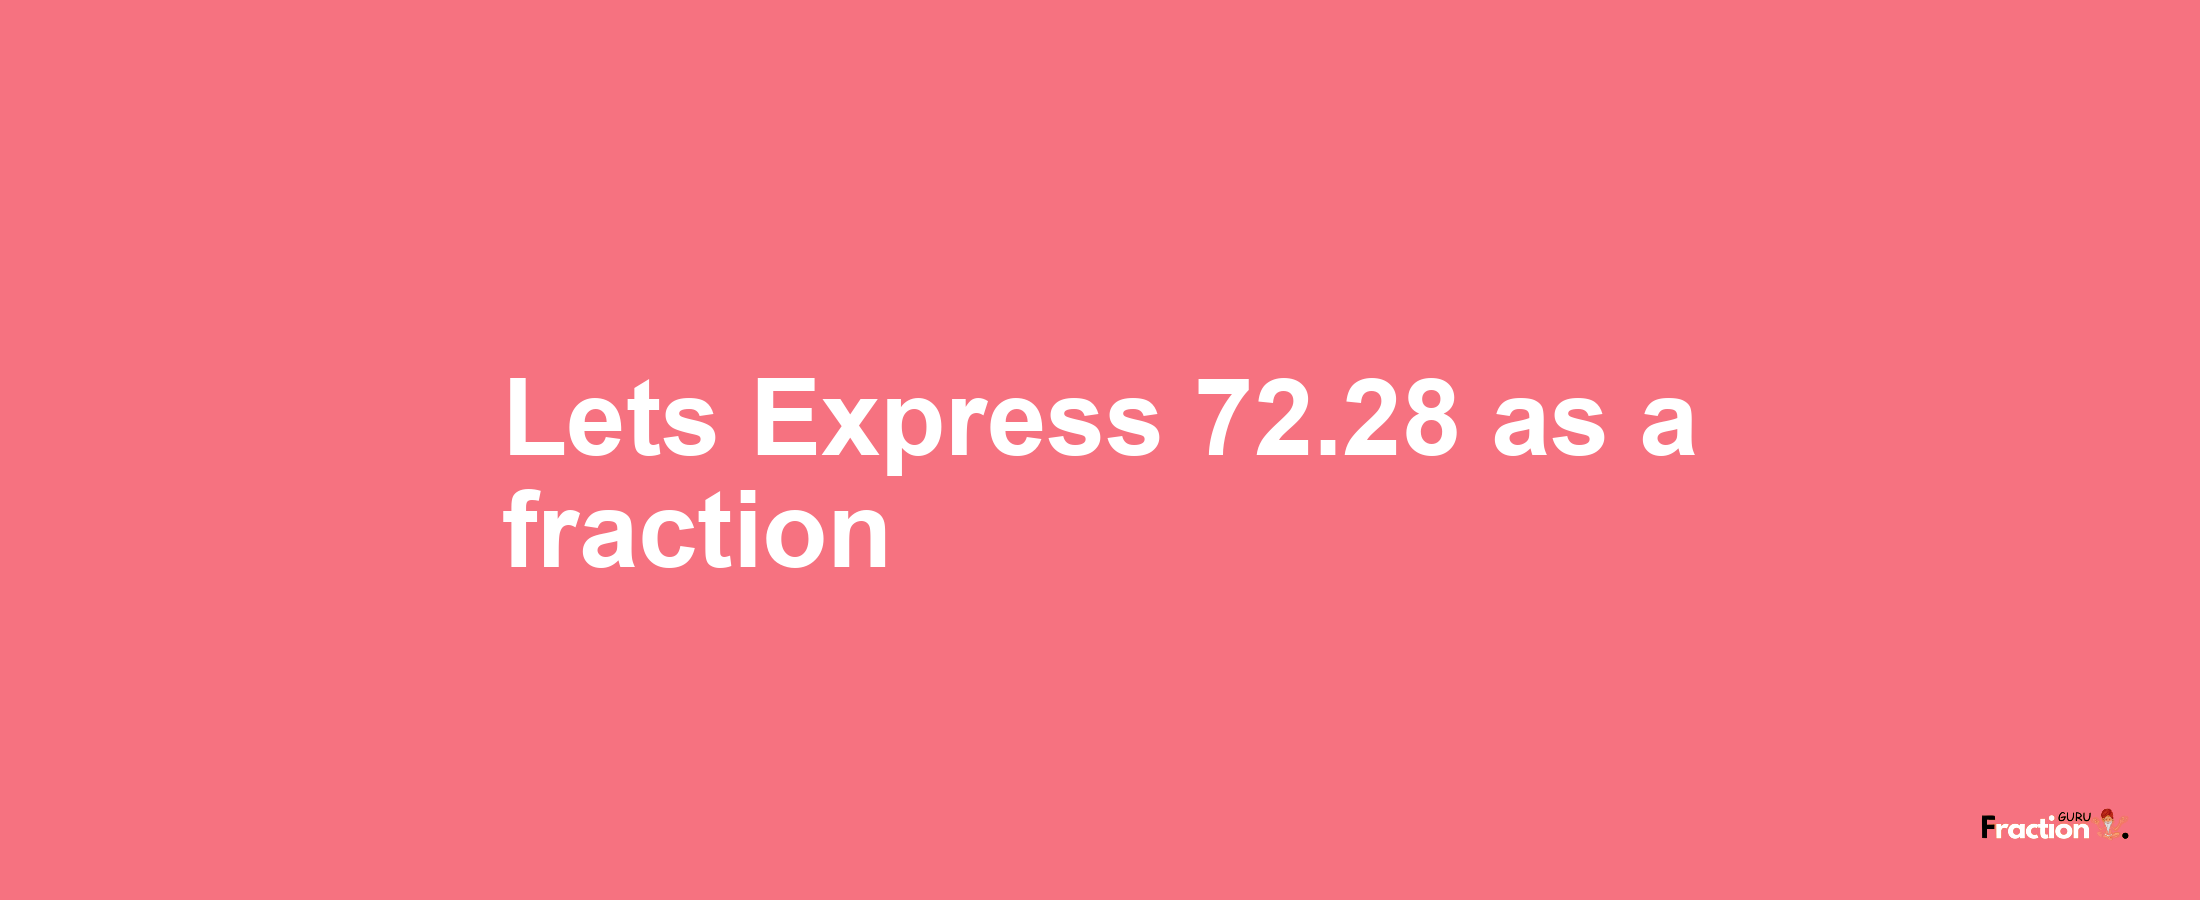 Lets Express 72.28 as afraction